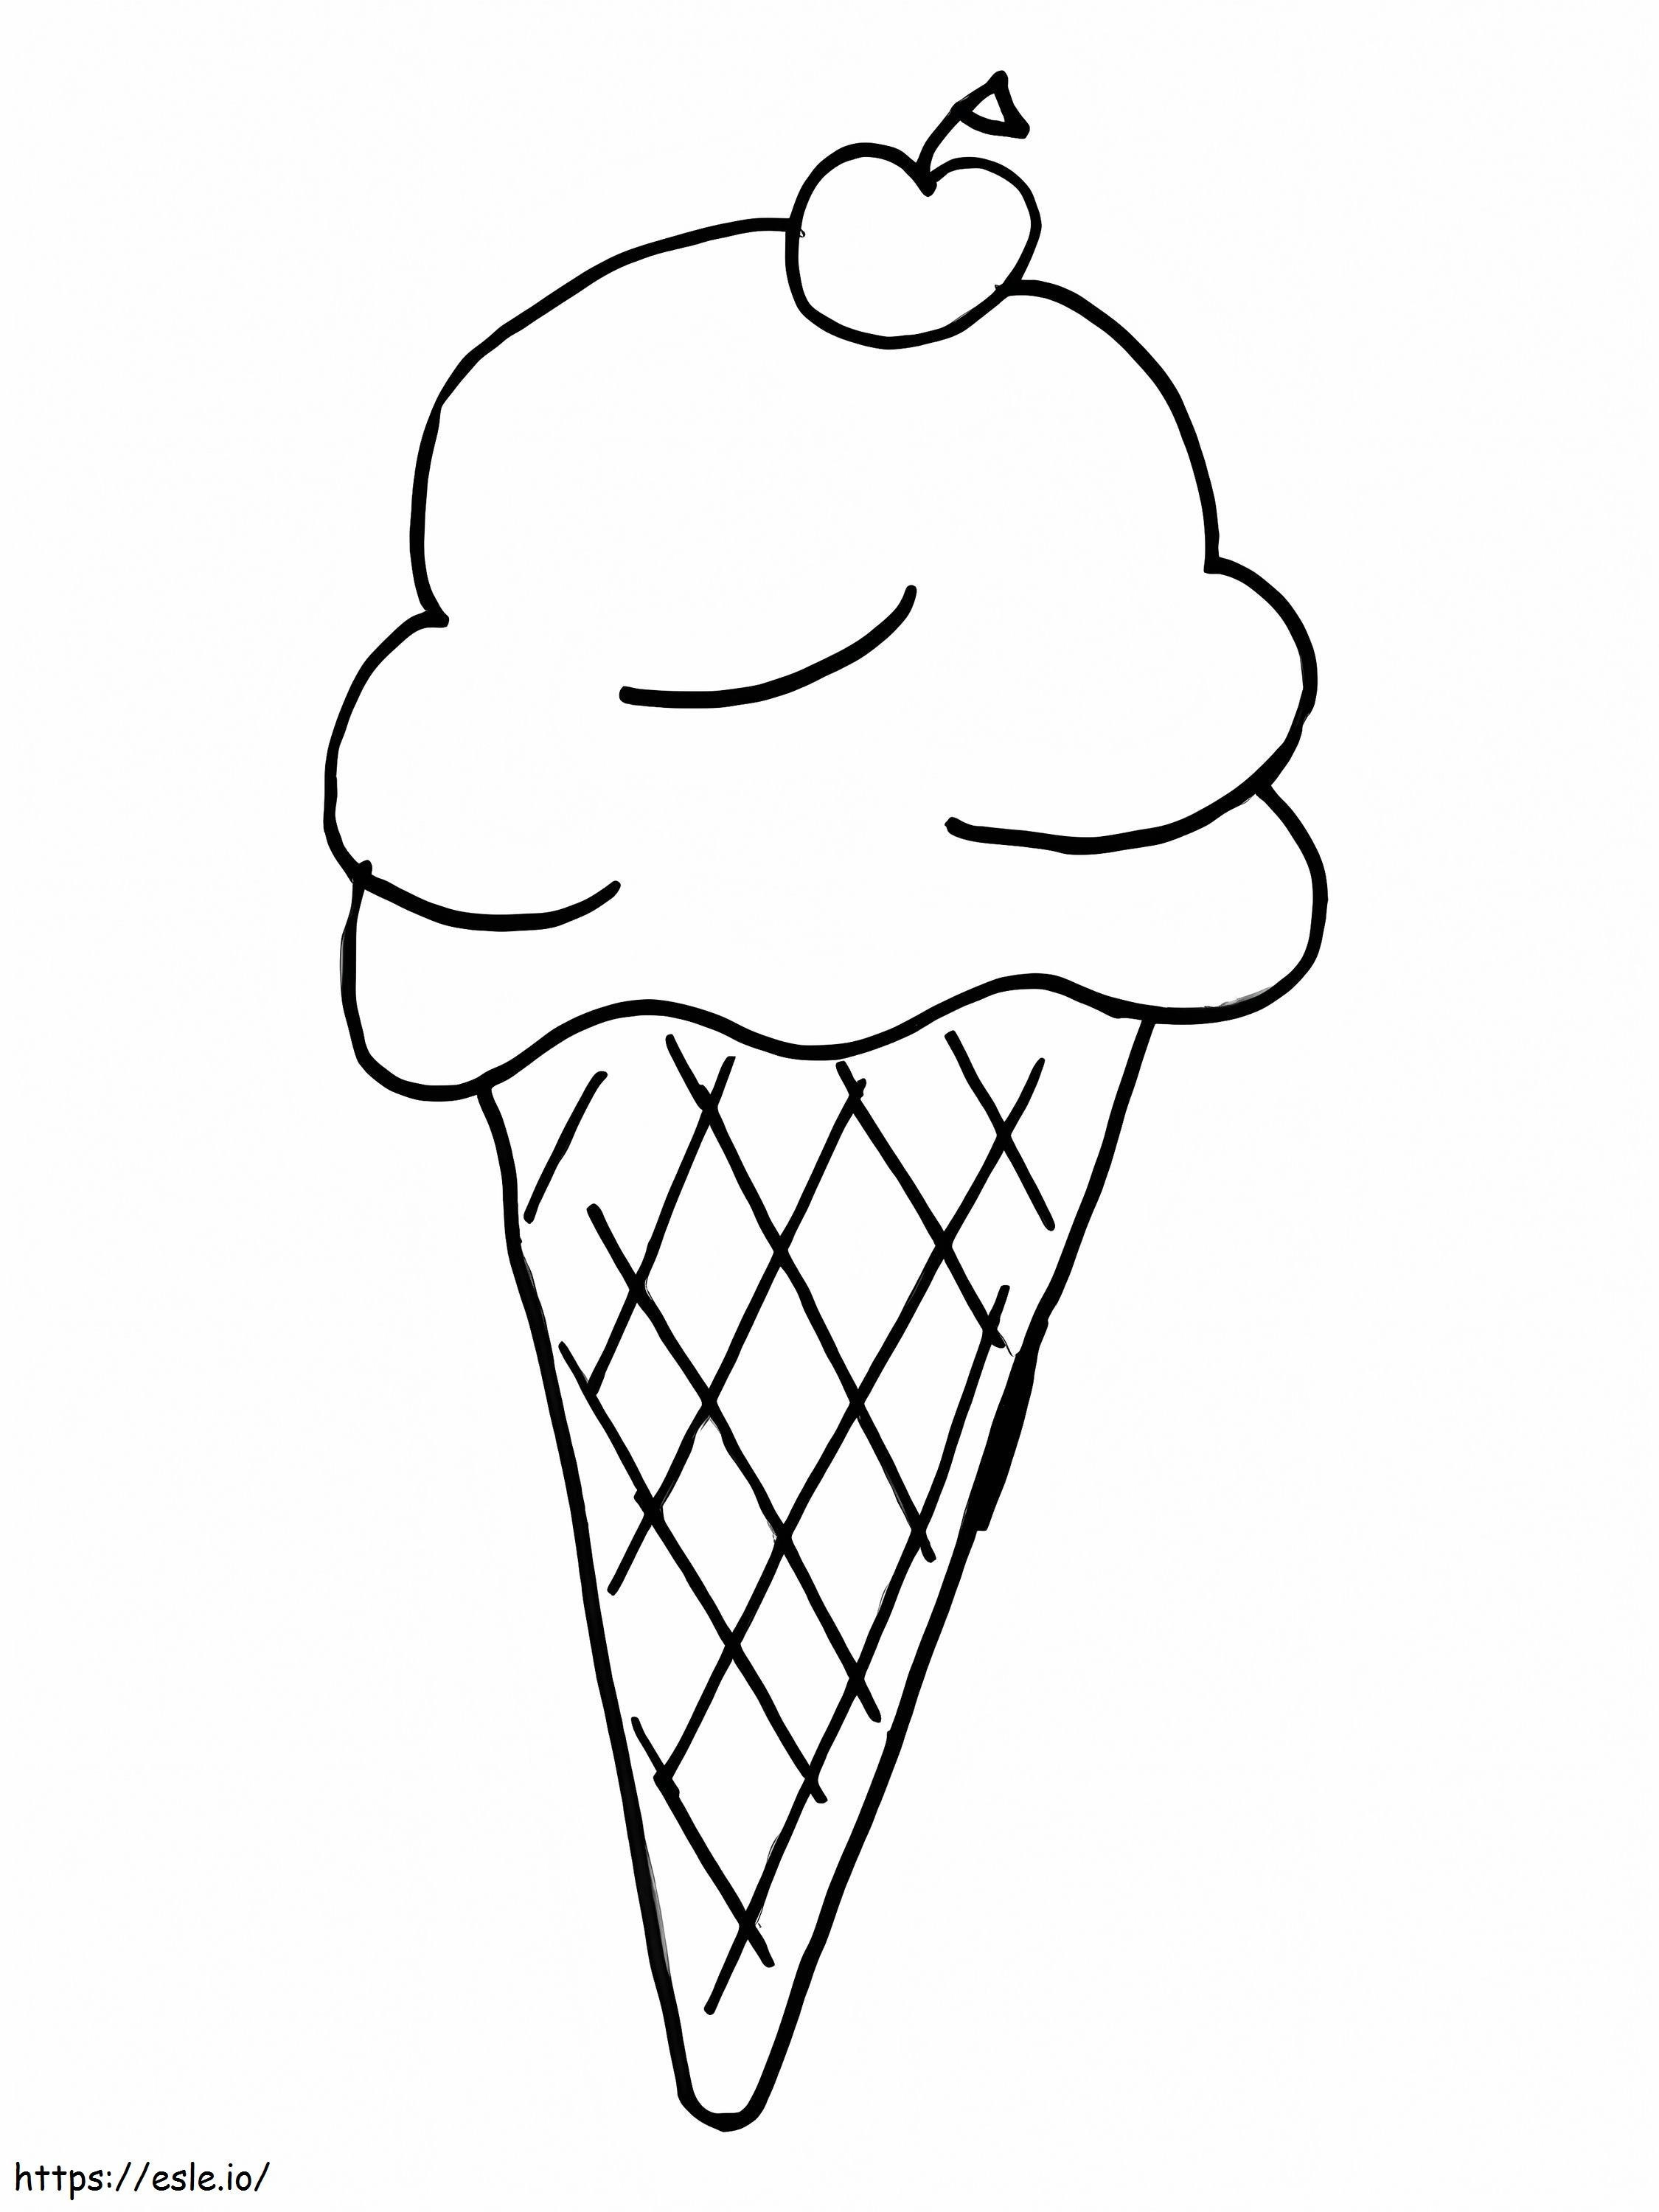 Normal Ice Cream coloring page